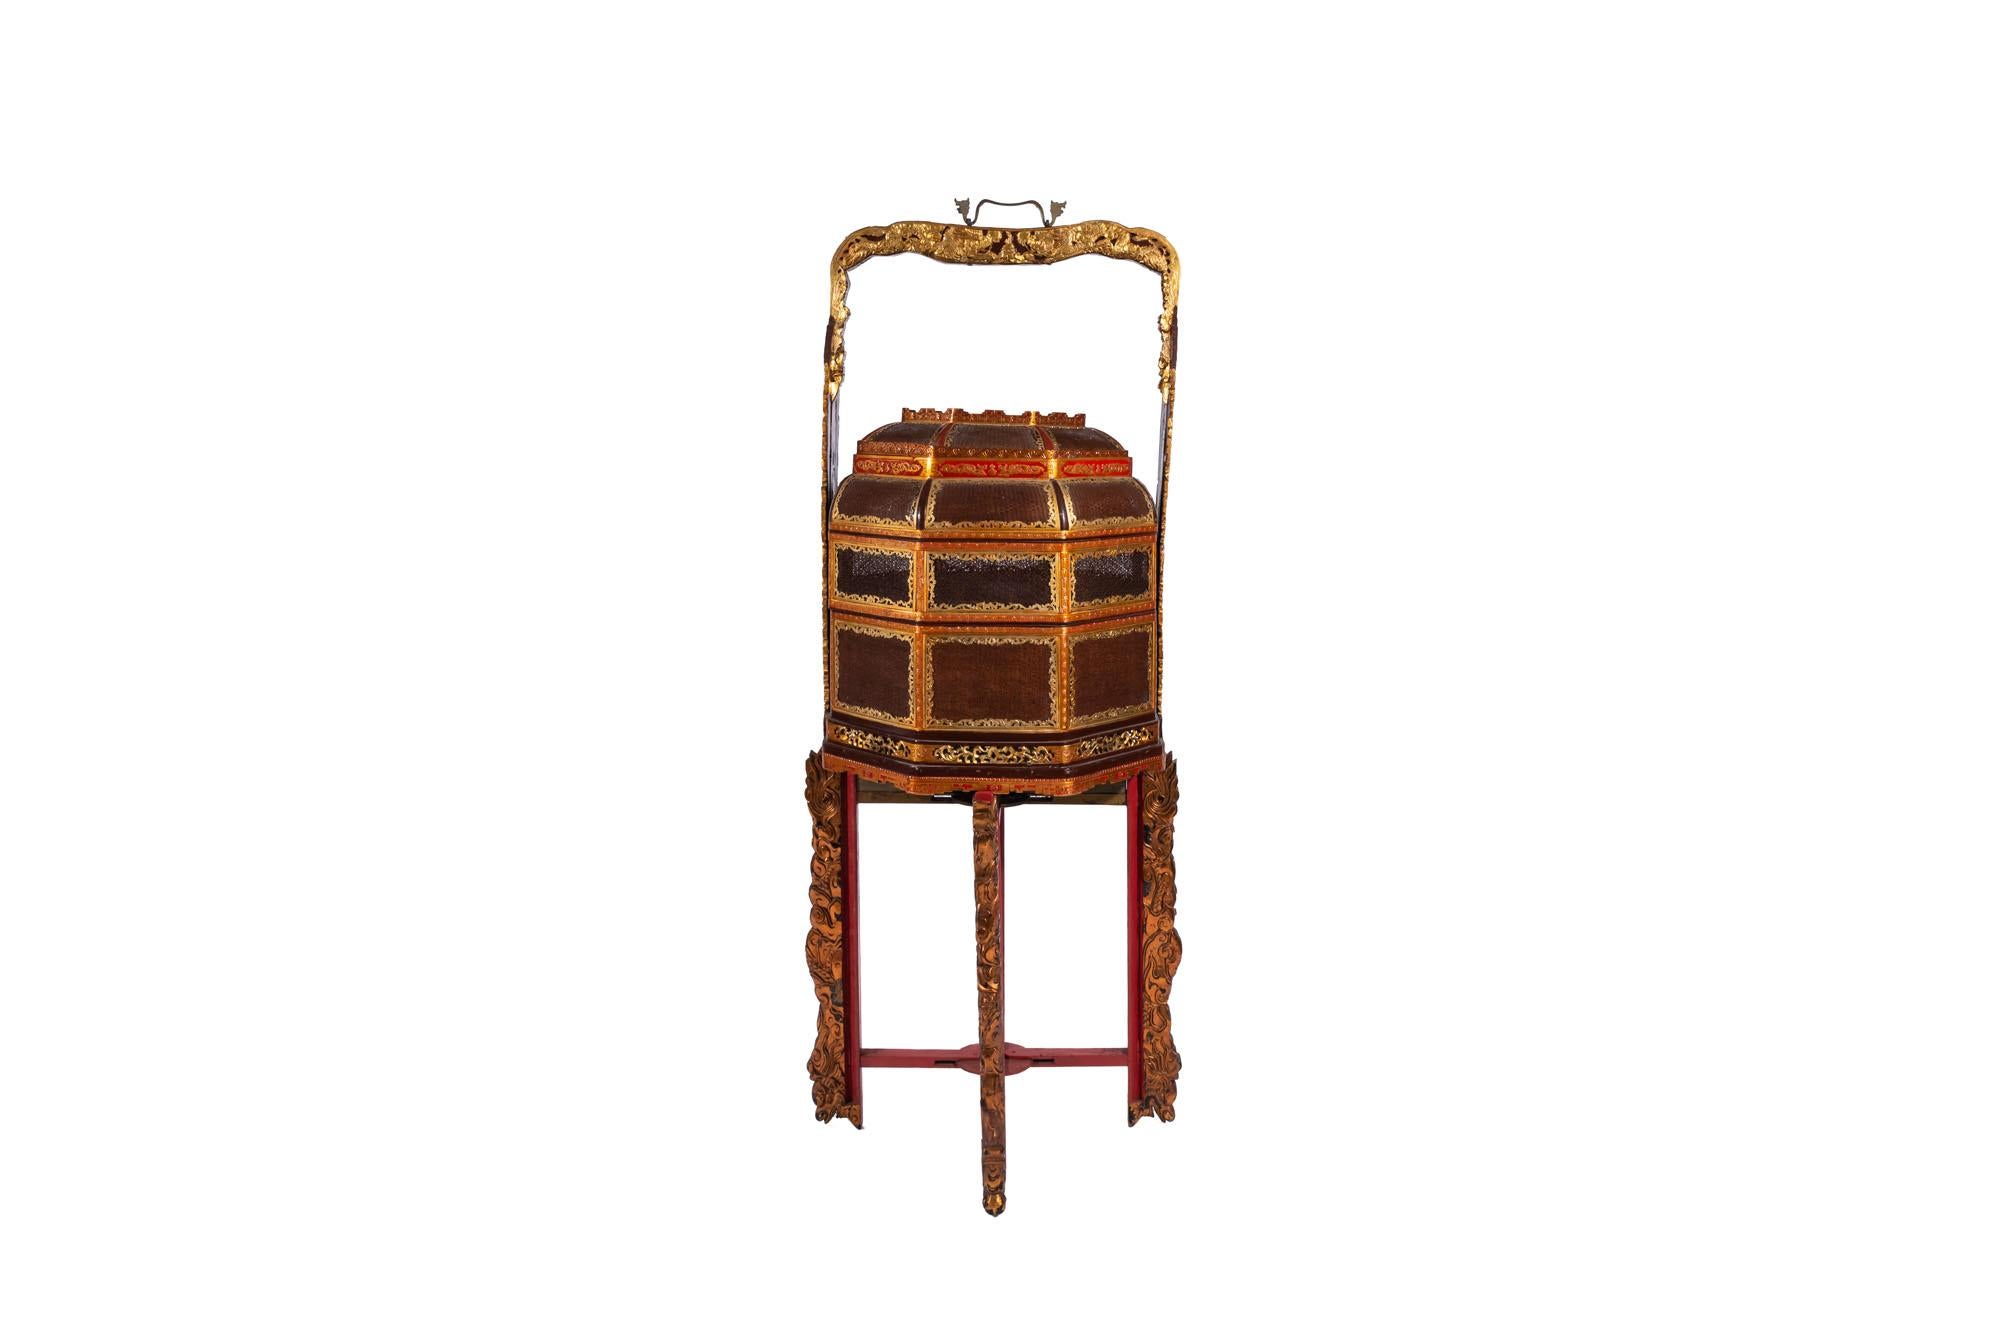 Set of four baskets in wickerwork, lacquered wood, gilded brass,
Three baskets with four compartments, one with three compartments and a base in red lacquered wood,
China, circa 1970

Measures: 
Biggest baskets: Width 55 cm, height 80 cm, depth